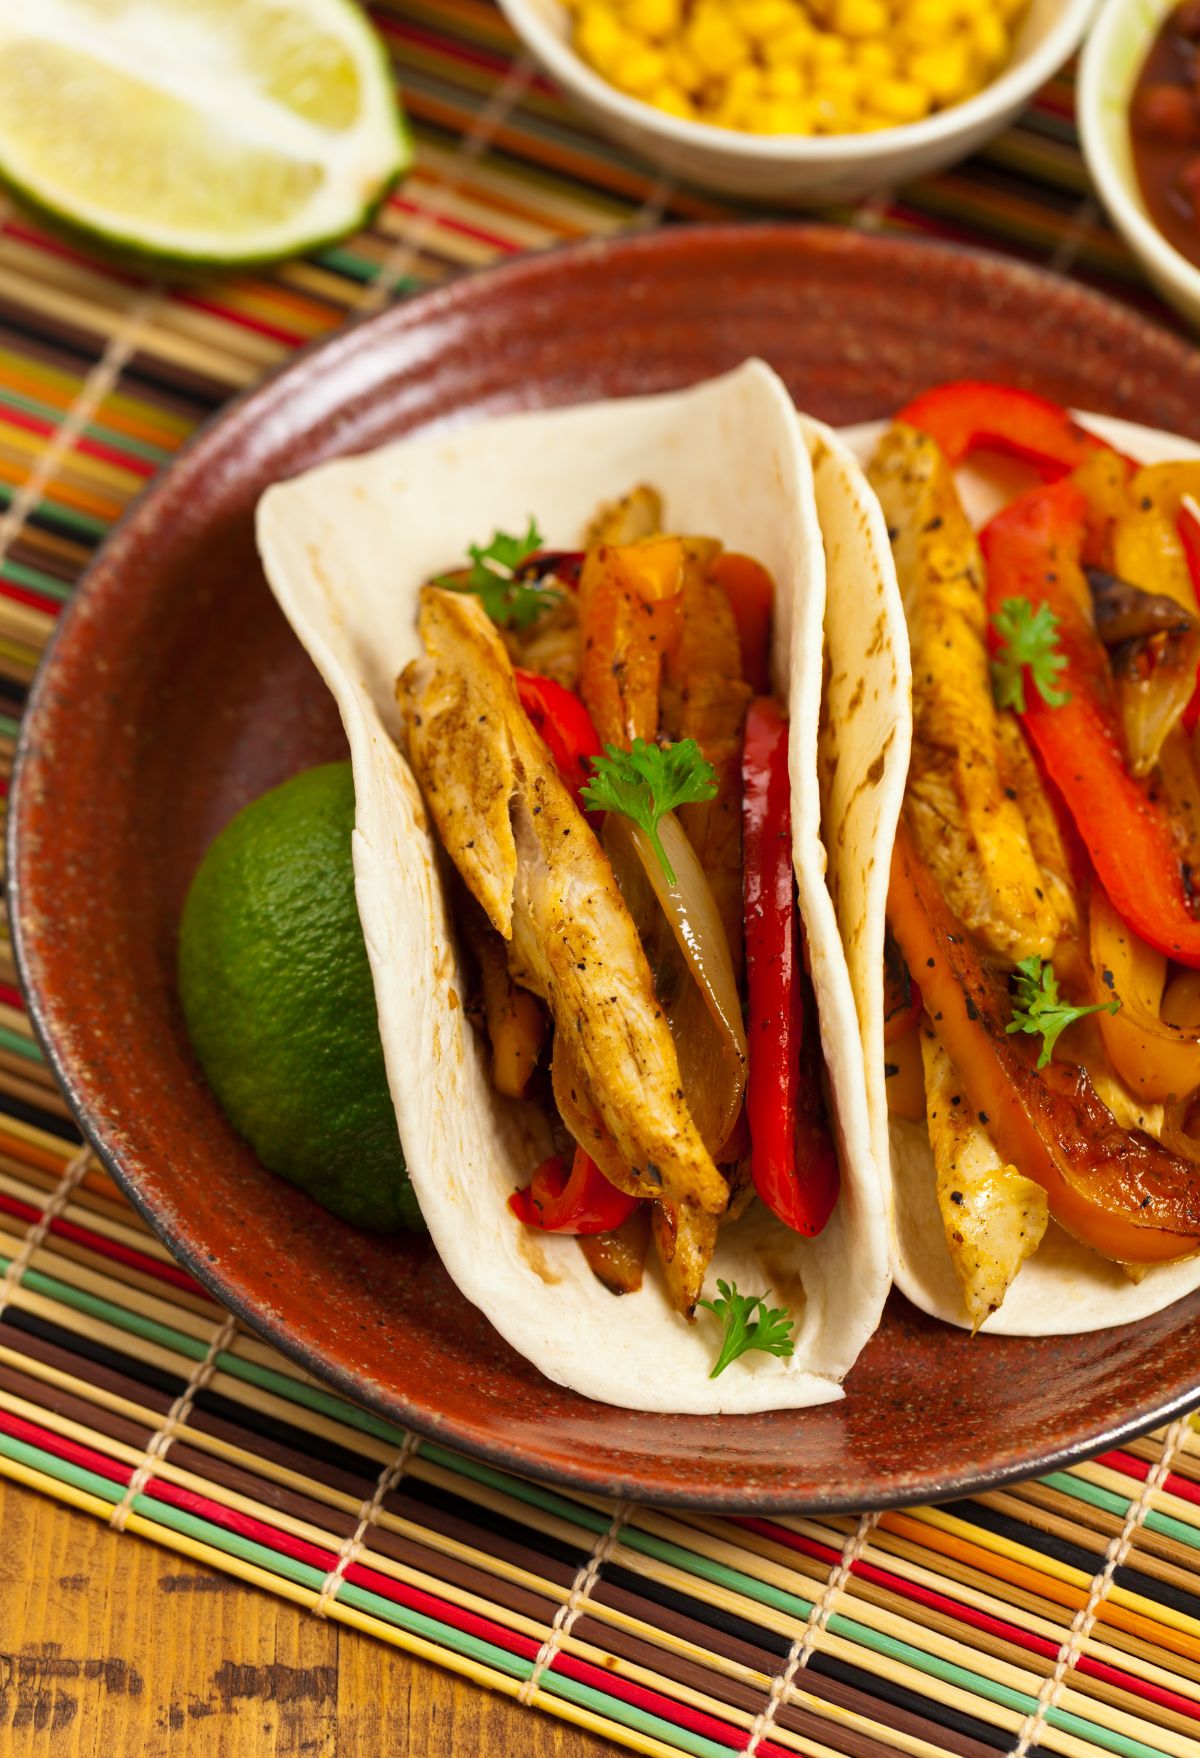 Two chicken fajitas with bell peppers and lime in a serving dish.